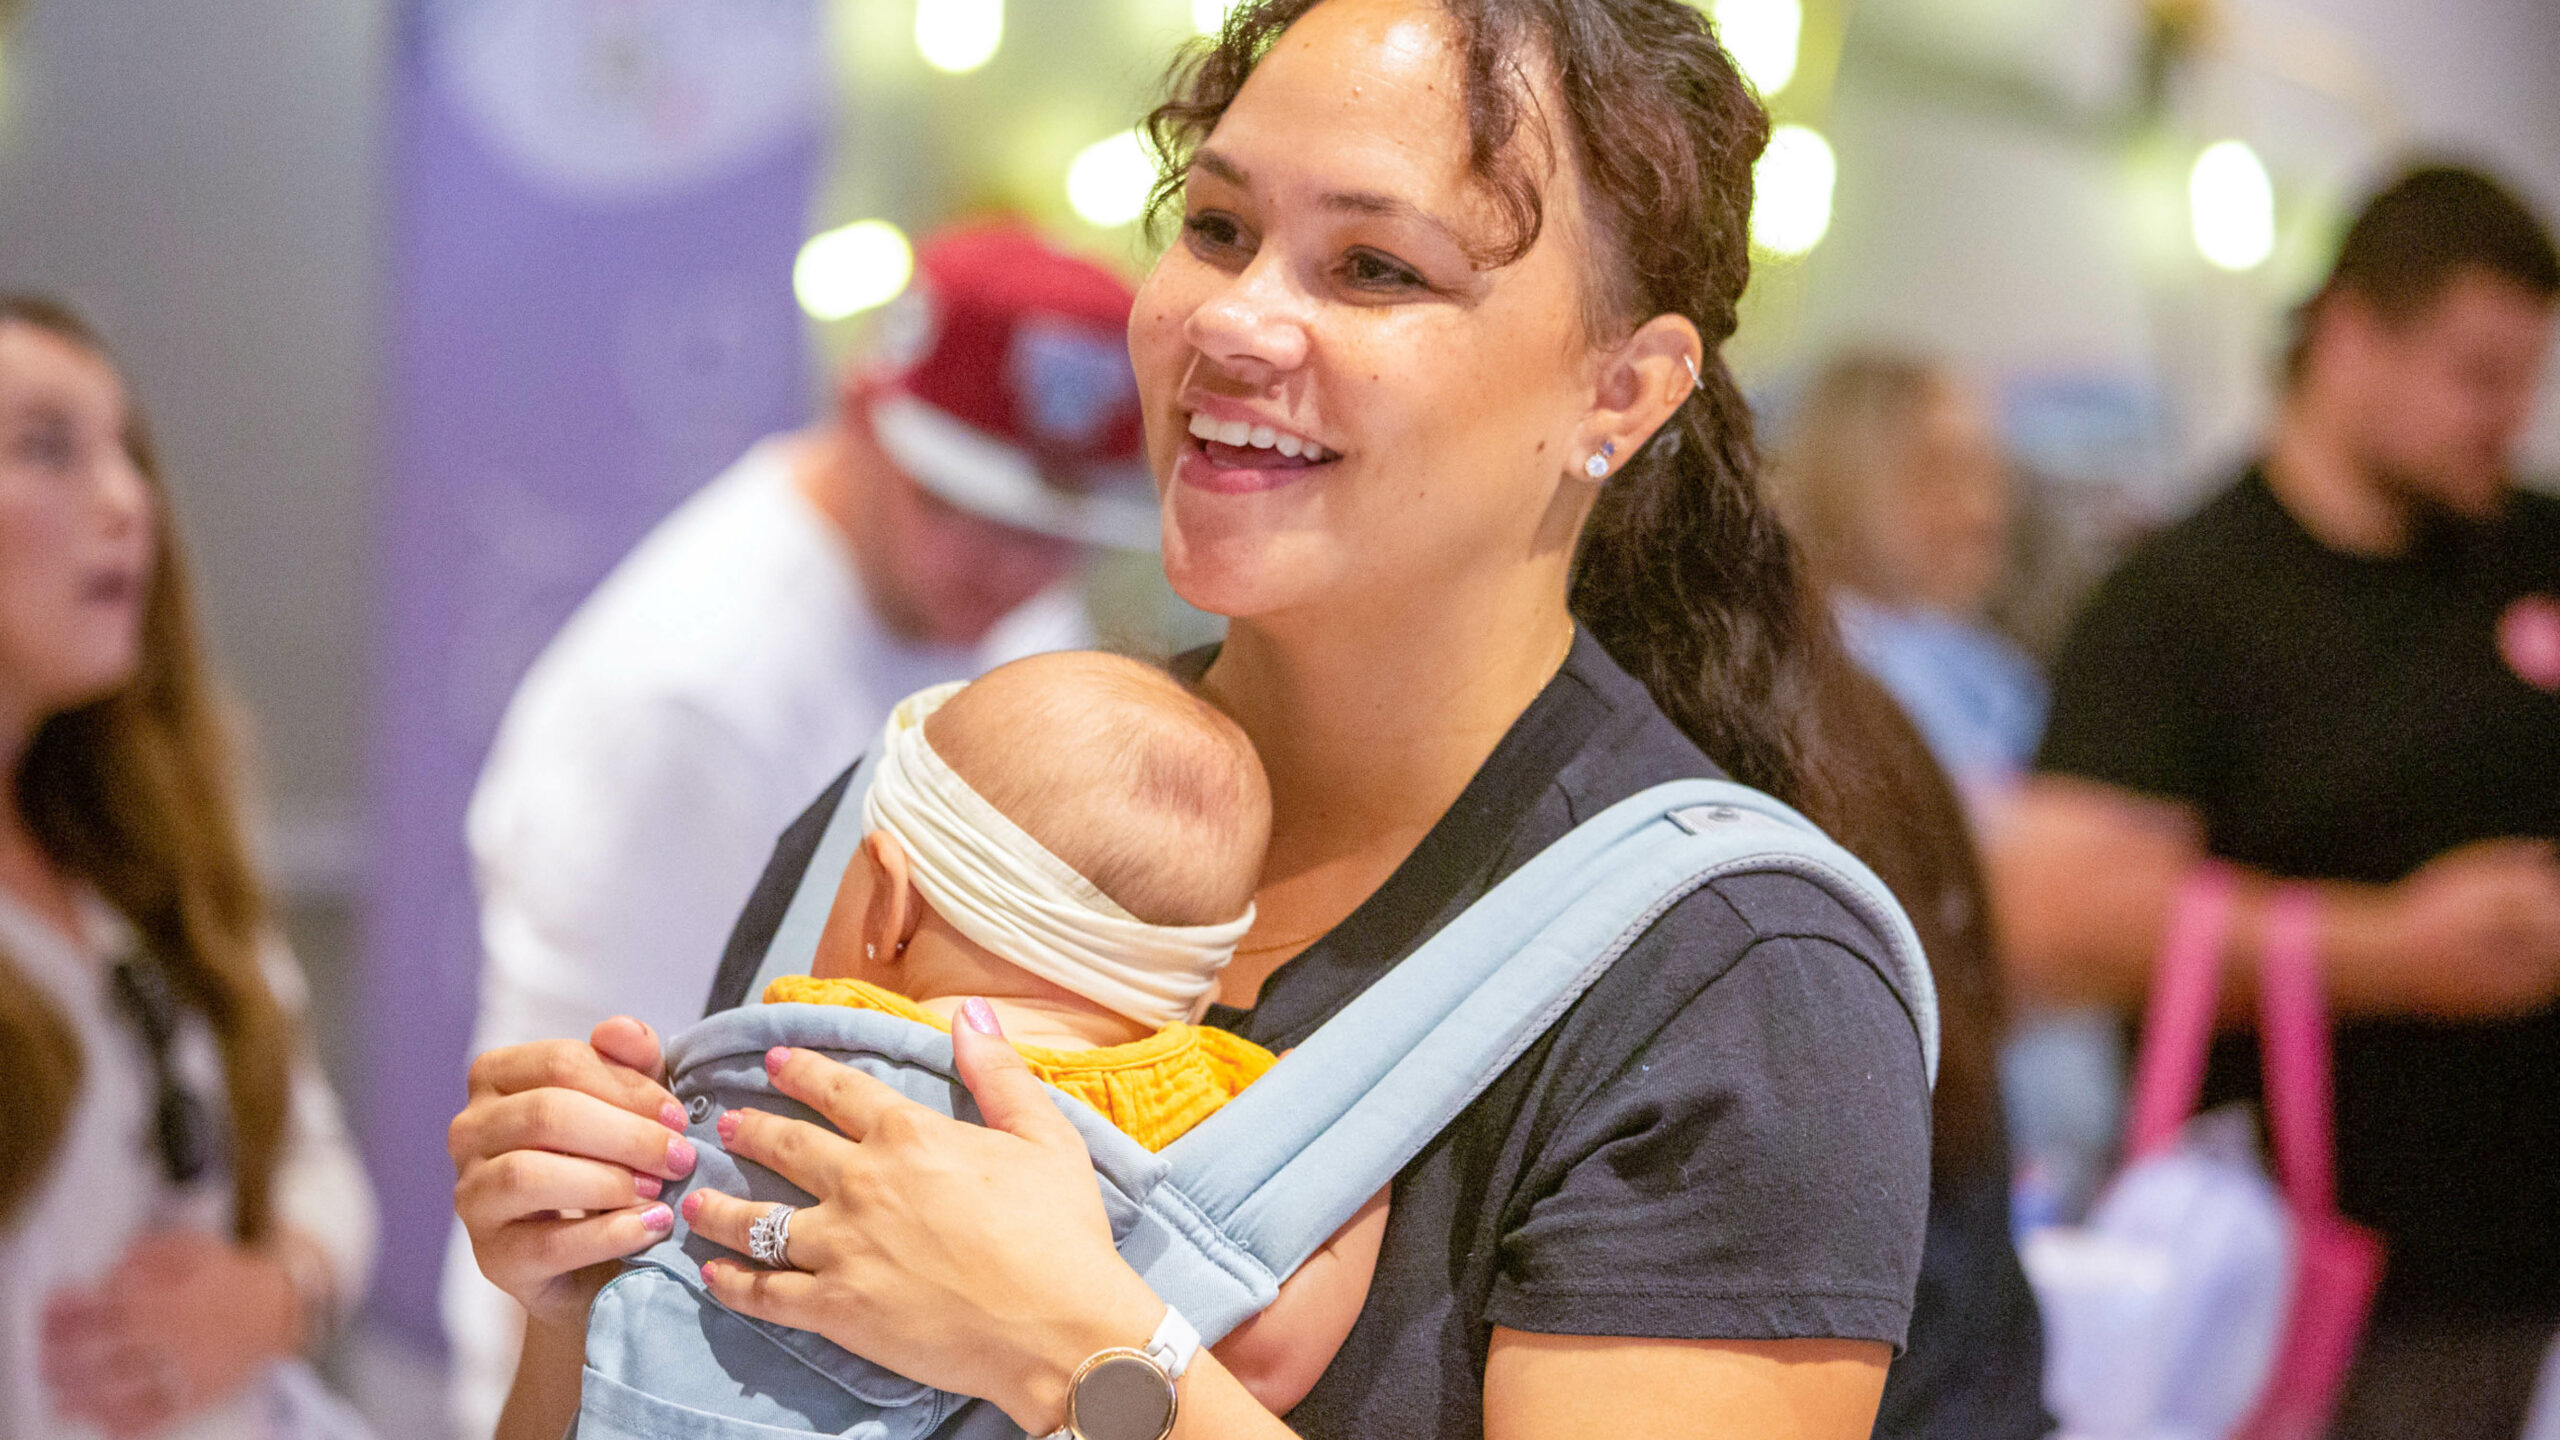 Mom with baby at Babies & Bumps event